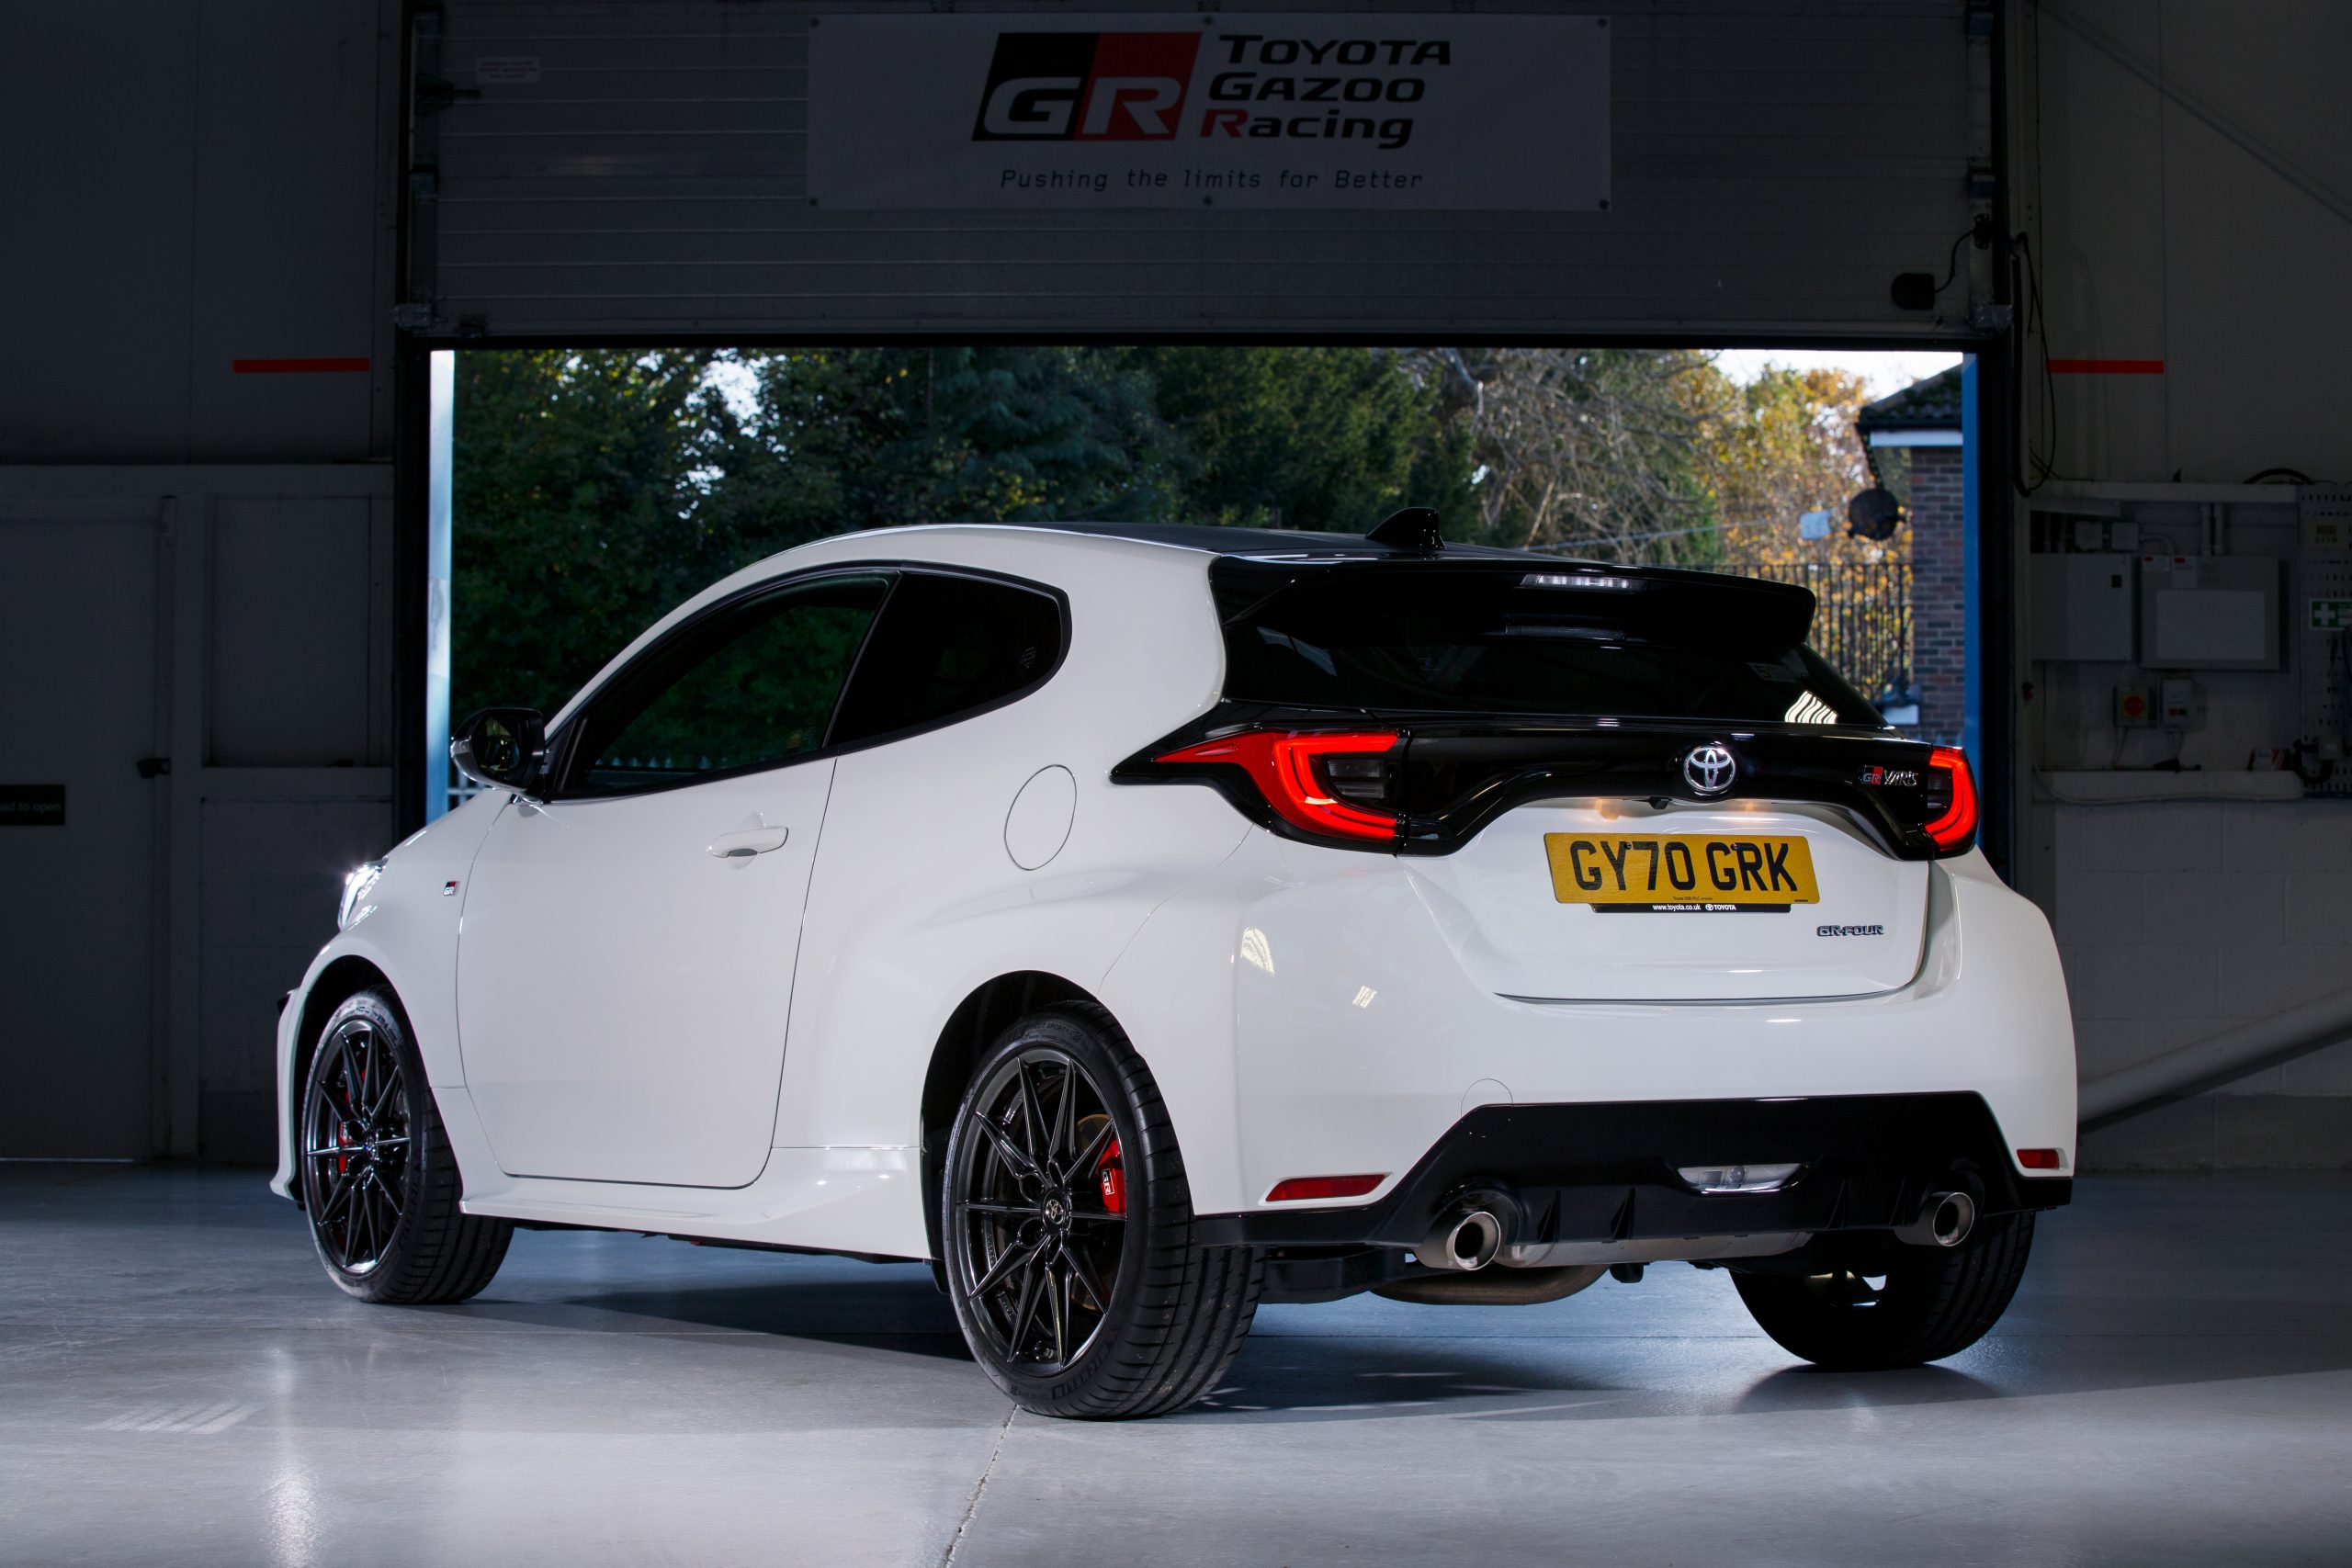 The rear 3/4 of a white Toyota GR Yaris in a garage